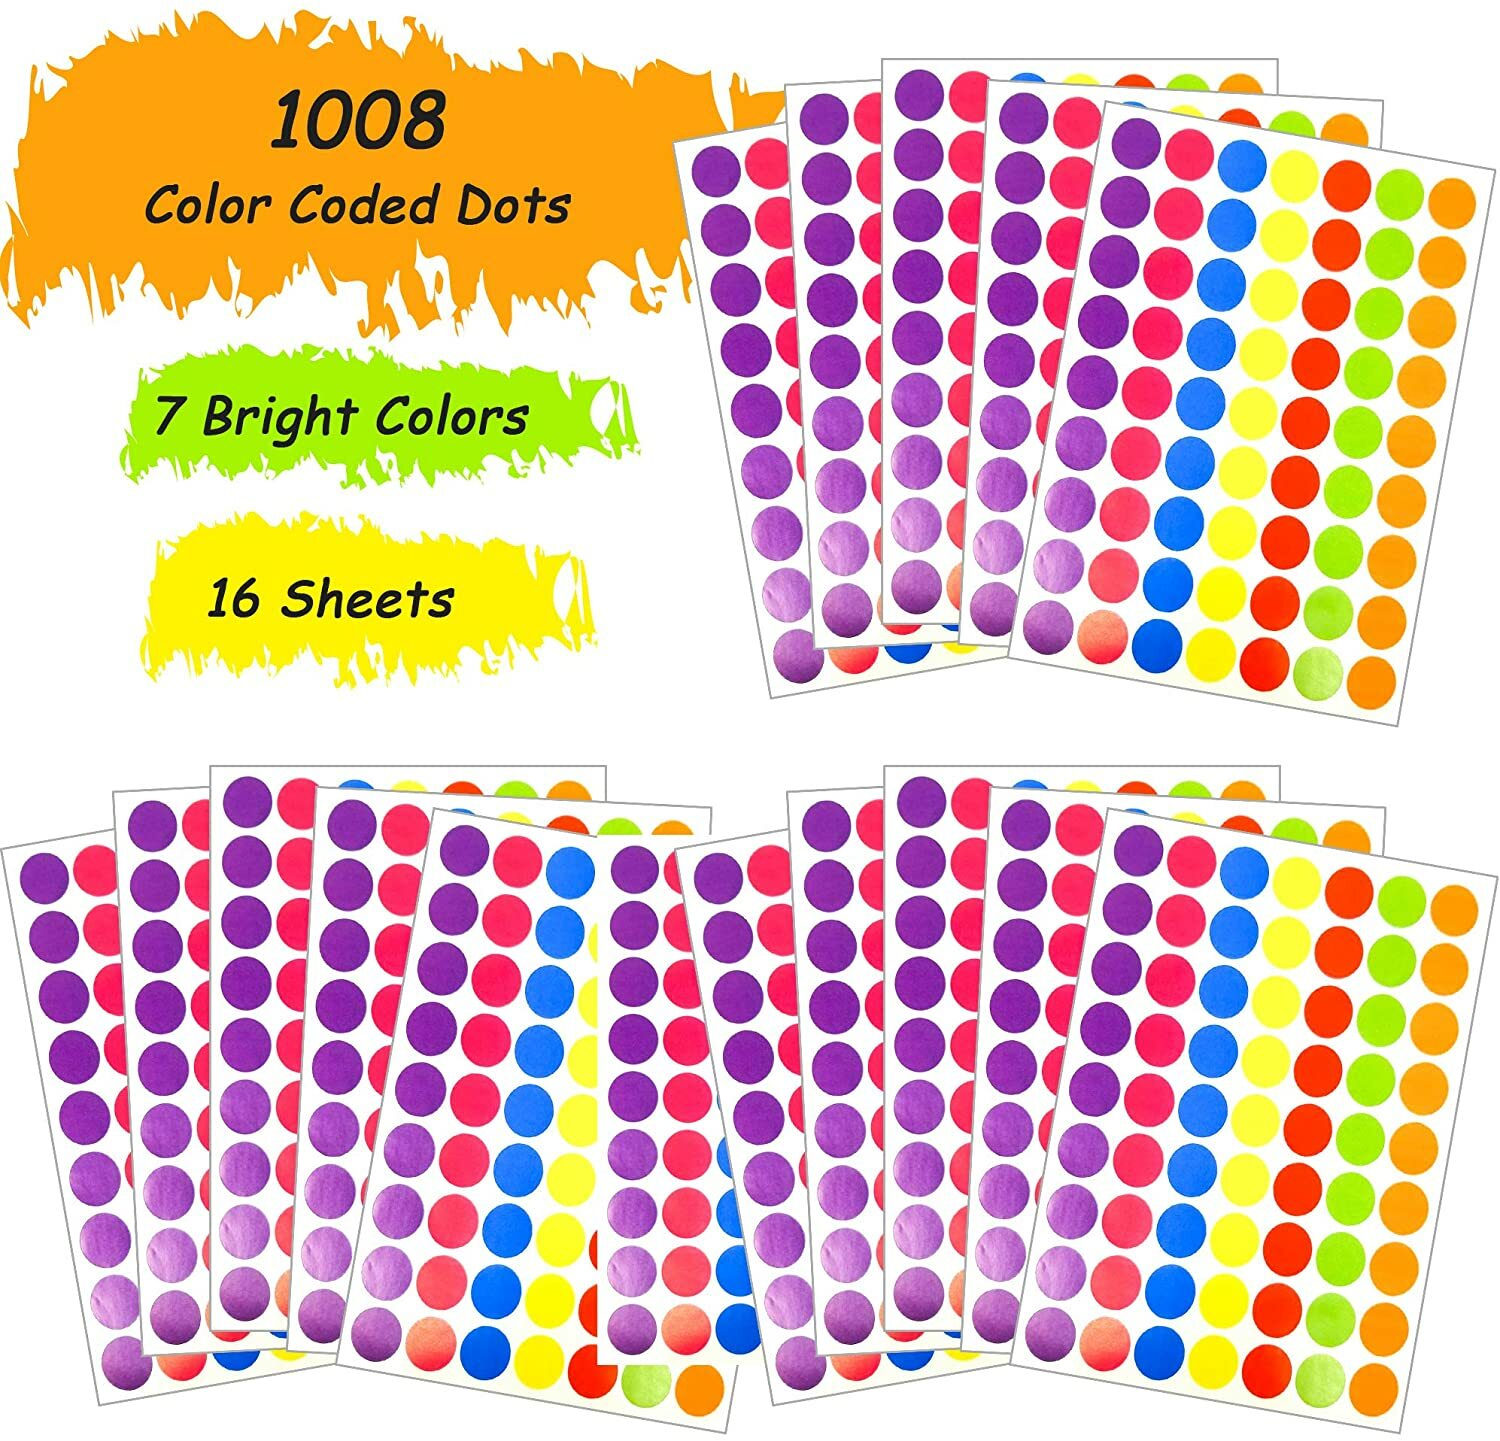 Amzer Pack of 1000 1-Inch Round Shape Self-Adhesive Color Coding Labels Circle Dot Stickers,11 Bright Colors,Print or Write Sheet(20 Sheet) Yellow